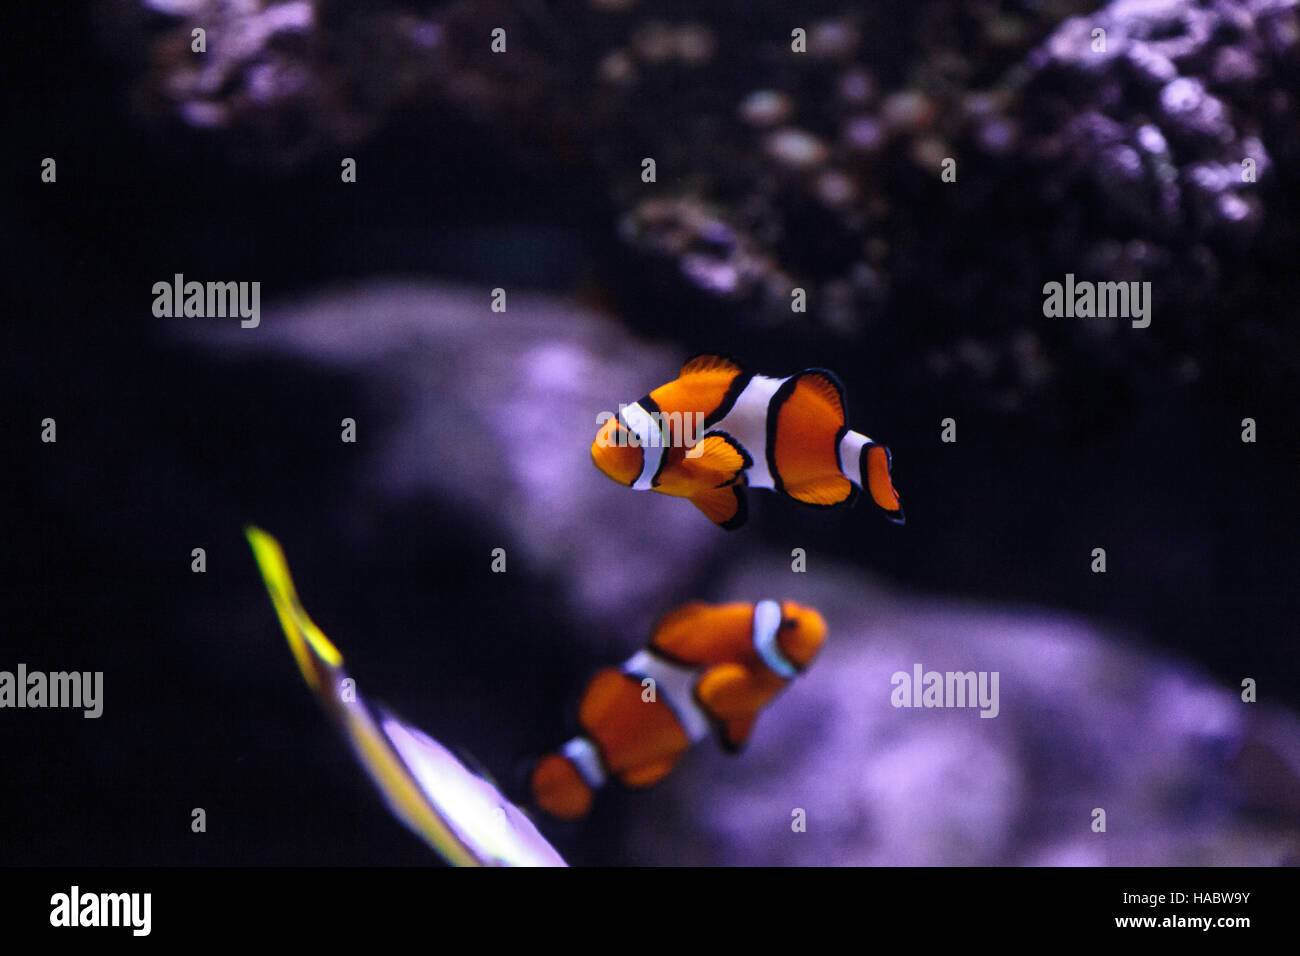 Clownfish, Amphiprioninae, in a marine fish and reef aquarium, staying close to its host anemone Stock Photo